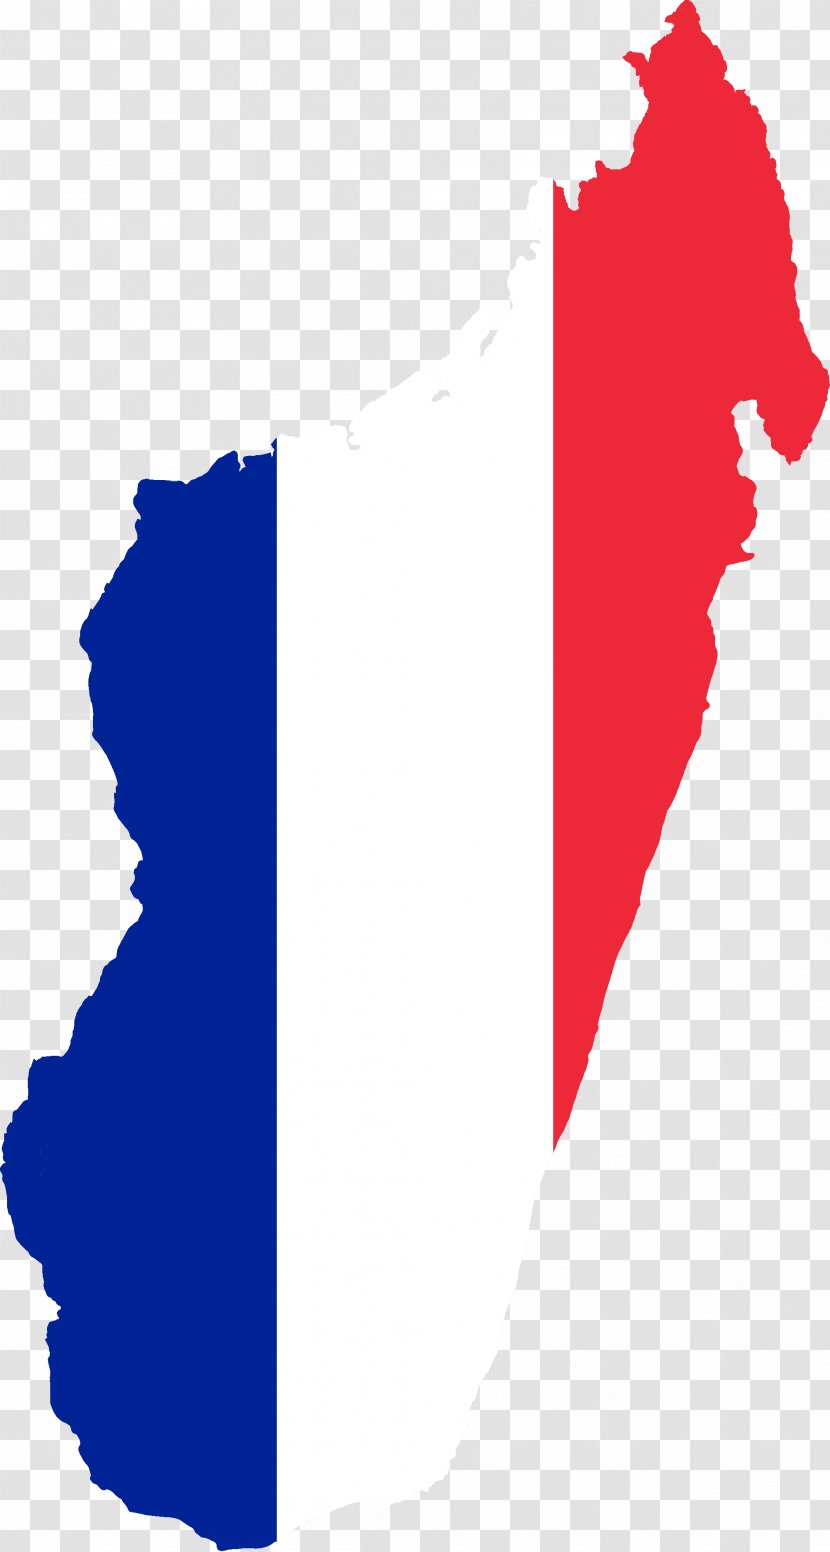 French Madagascar France Malagasy General Election, 2013 Map - Blank - Flag Transparent PNG